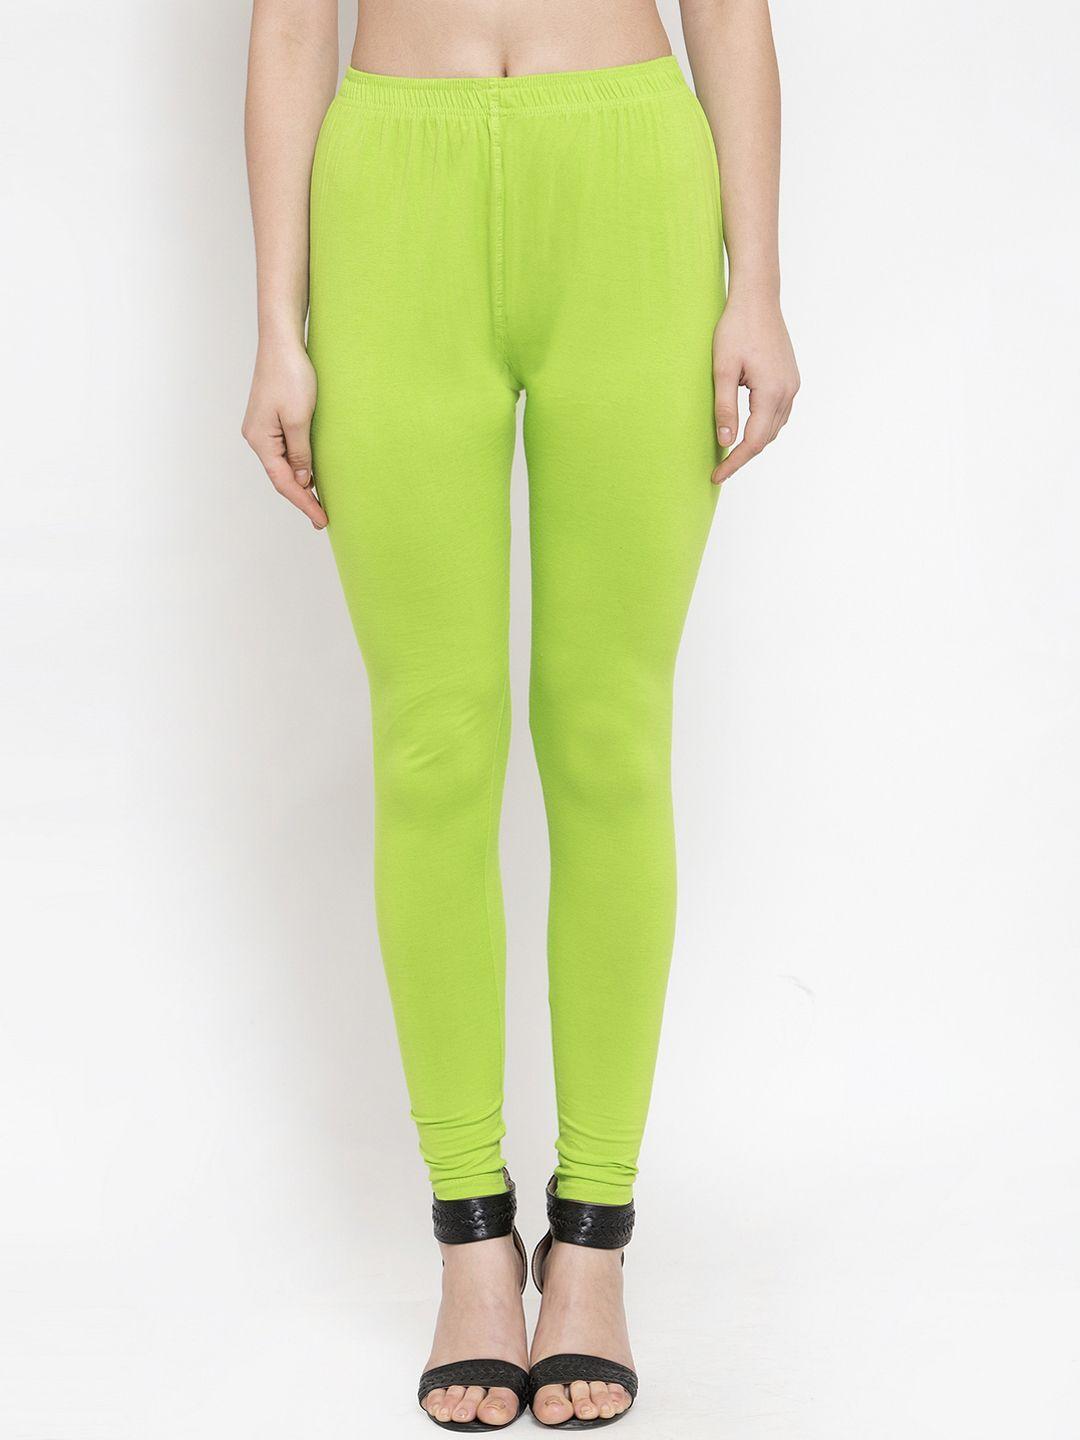 tag 7 women green solid ankle-length leggings